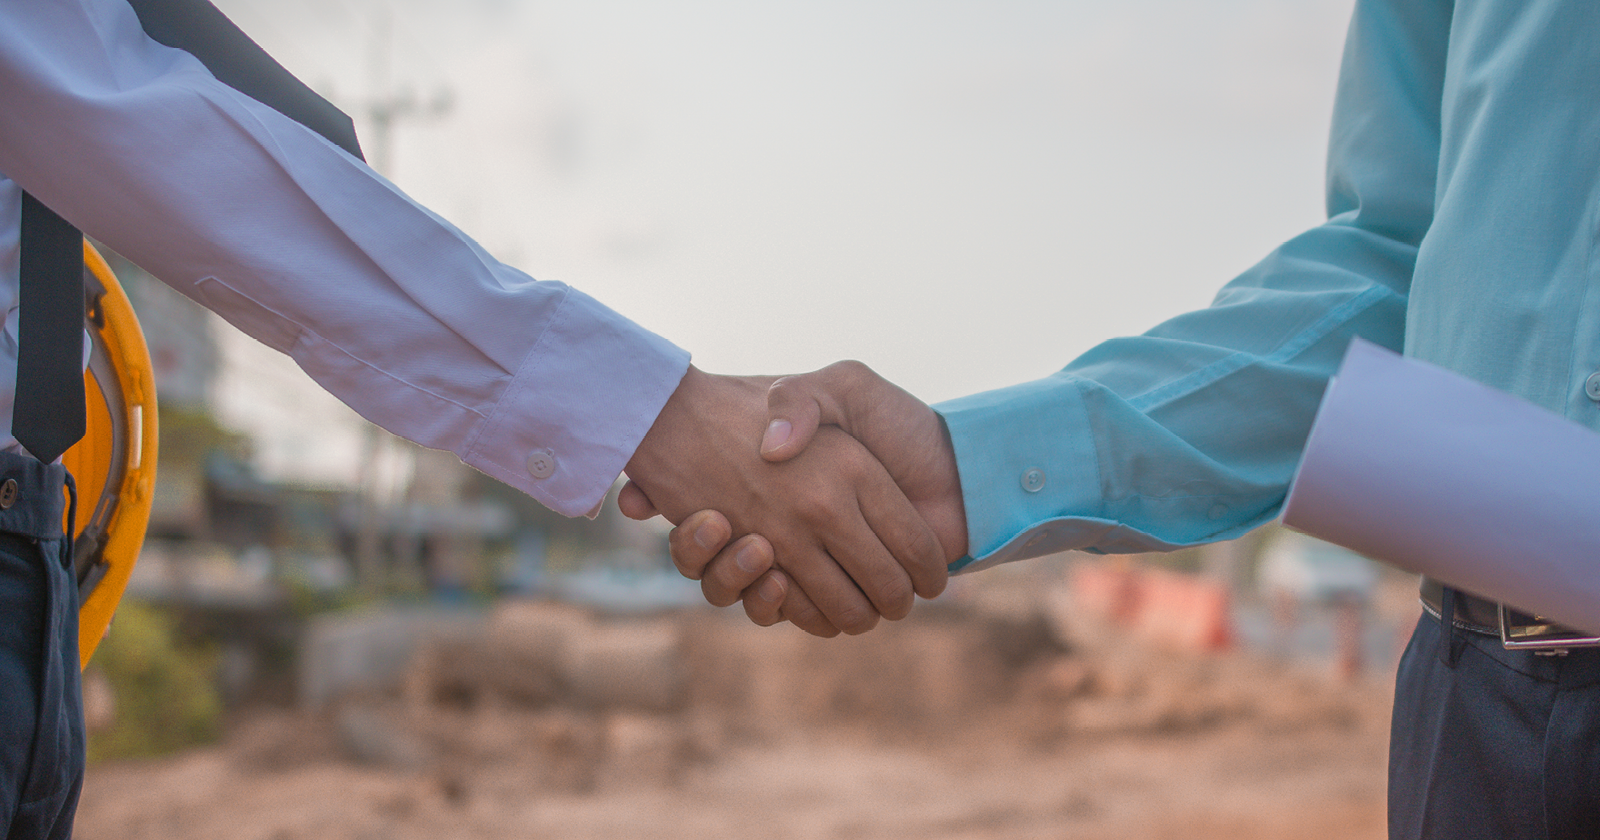 Businesspeople shaking hands in agreement. Exponent engineering expertise for construction disputes.